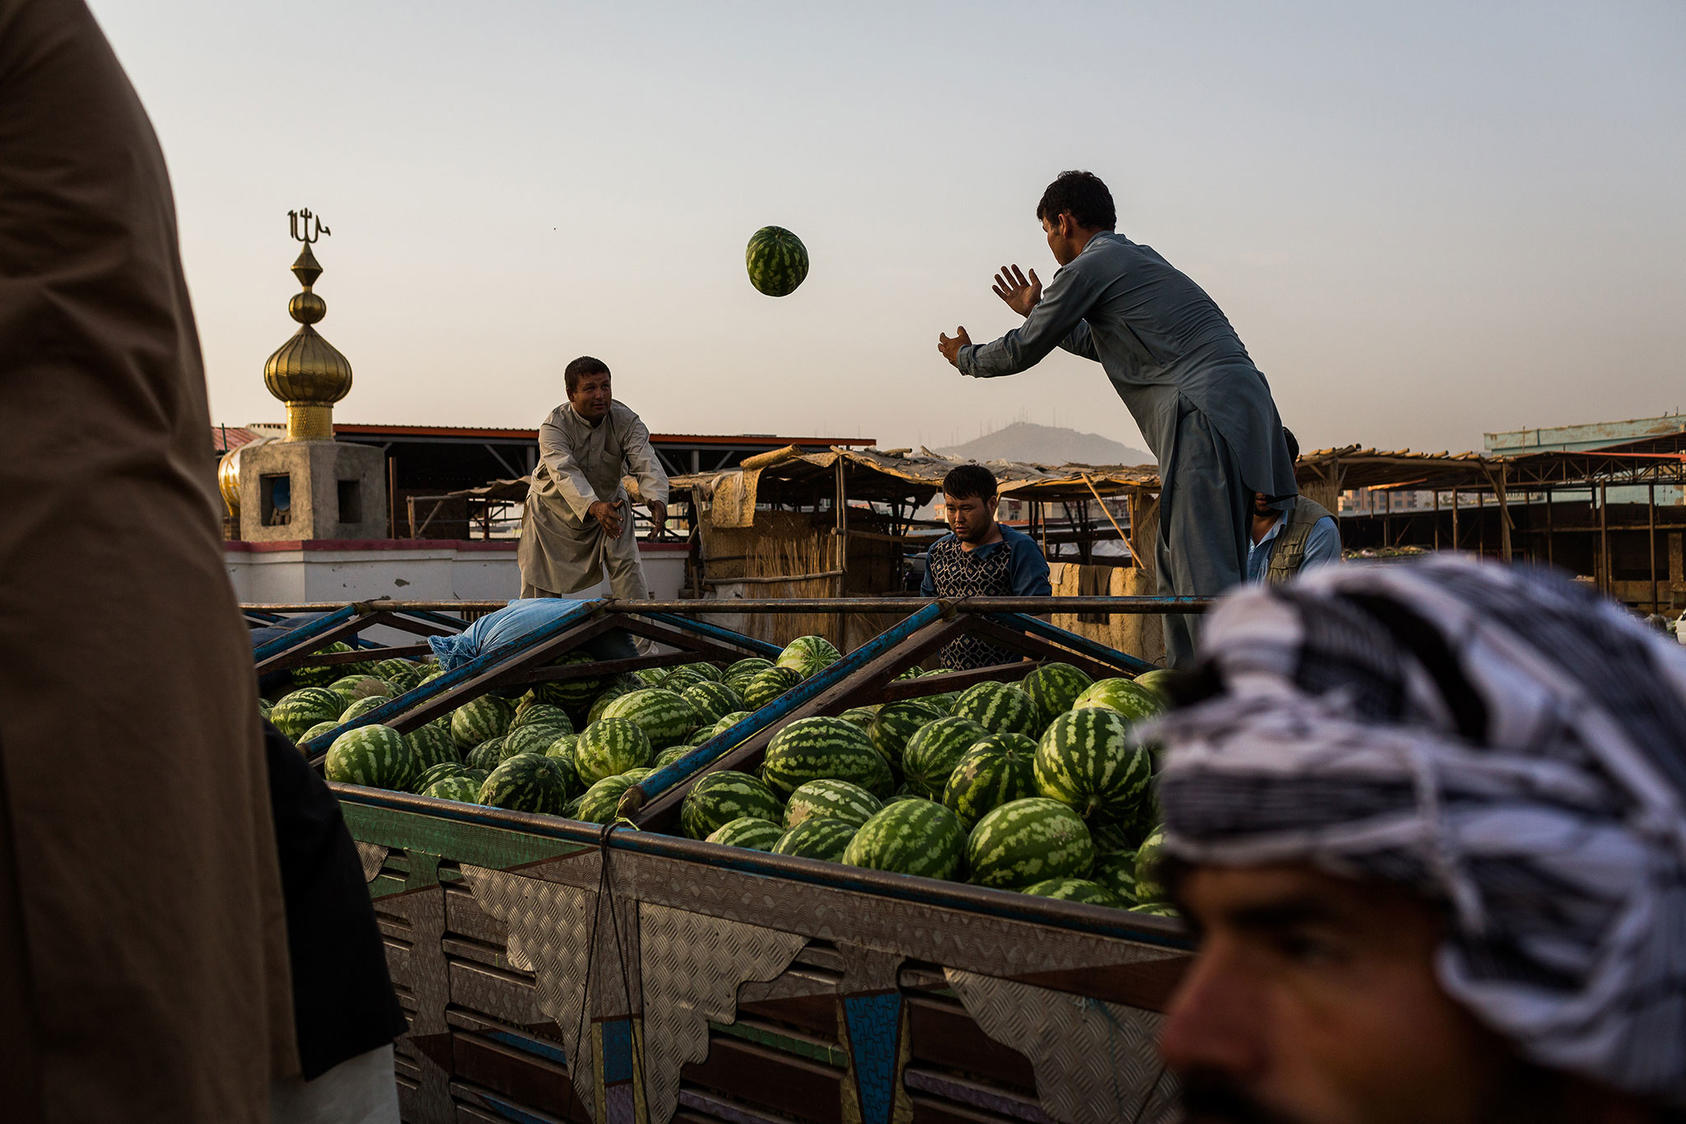 Farmers unload melons at the melon market in Kabul, Aug. 8, 2017. As bountiful as the fruit is this season, the Taliban and militias defending the government against it have taken a toll on farmers and traders. (Jim Huylebroek/The New York Times) 